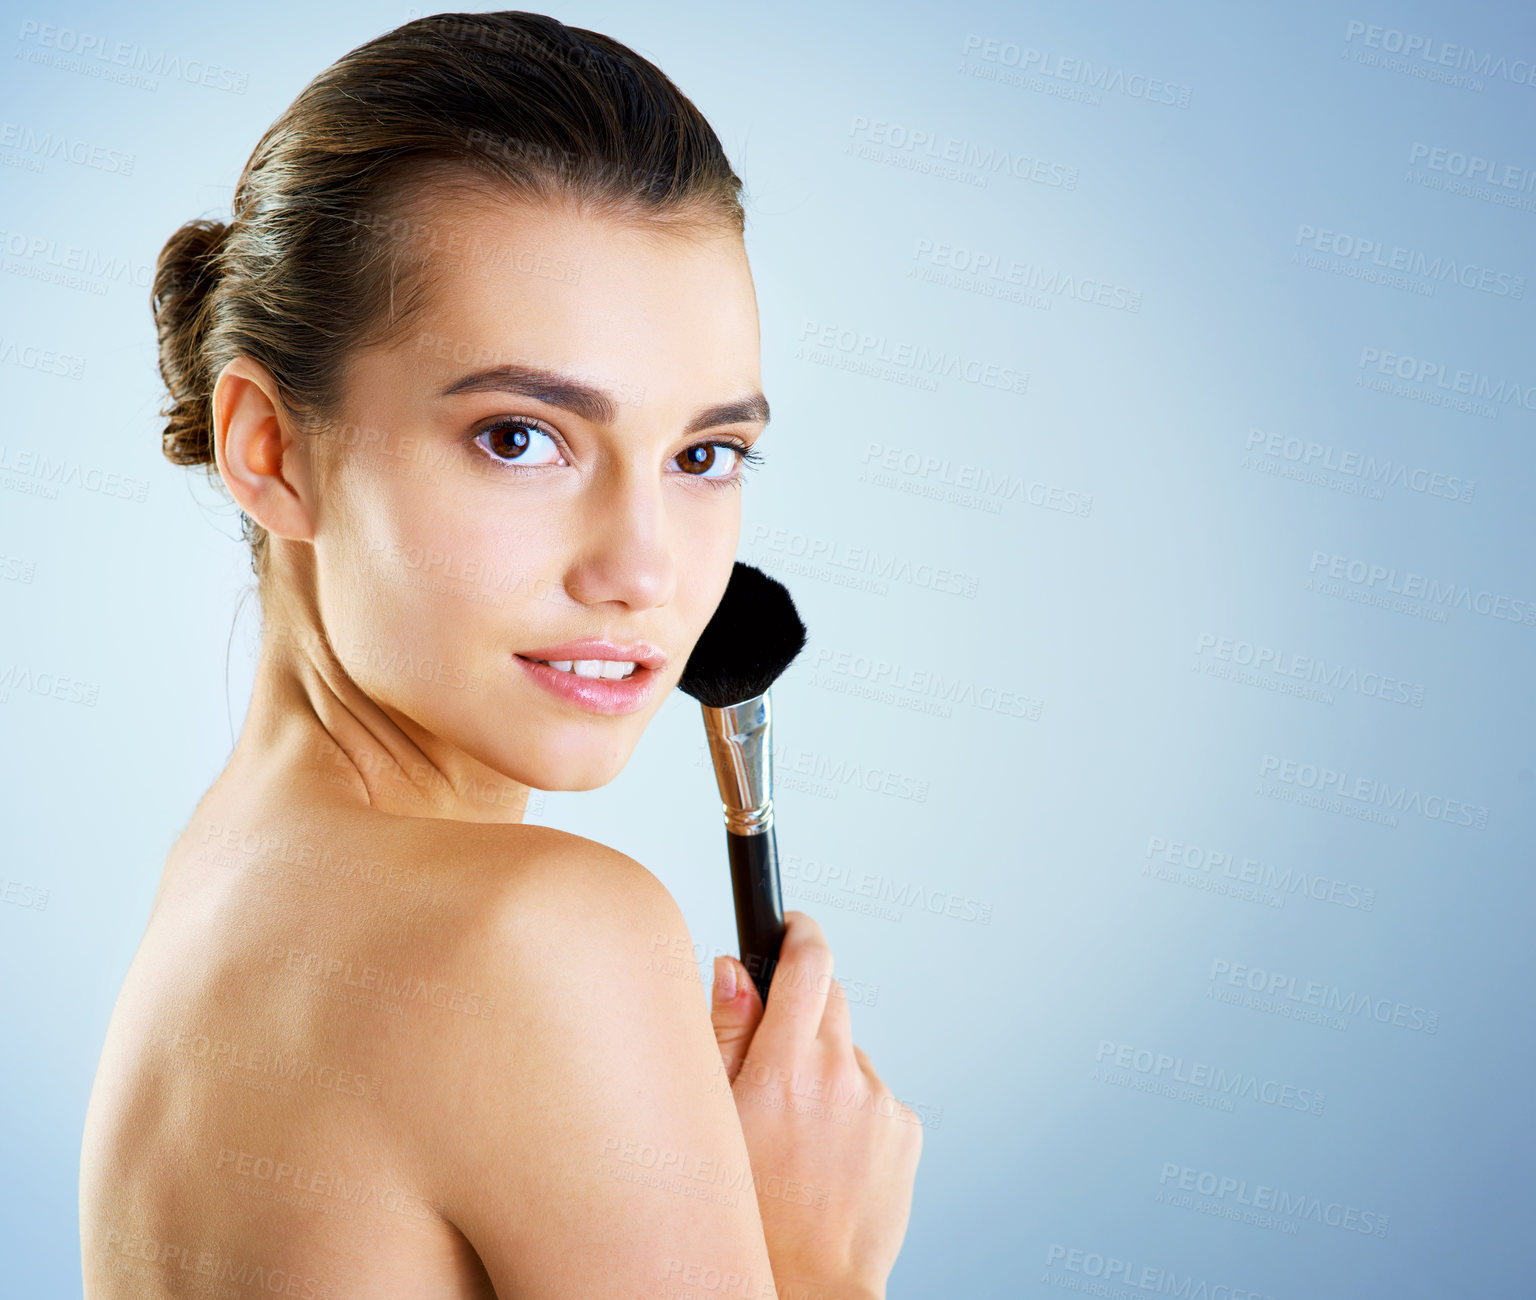 Buy stock photo Studio portrait of a beautiful young woman applying makeup with a brush against a blue background